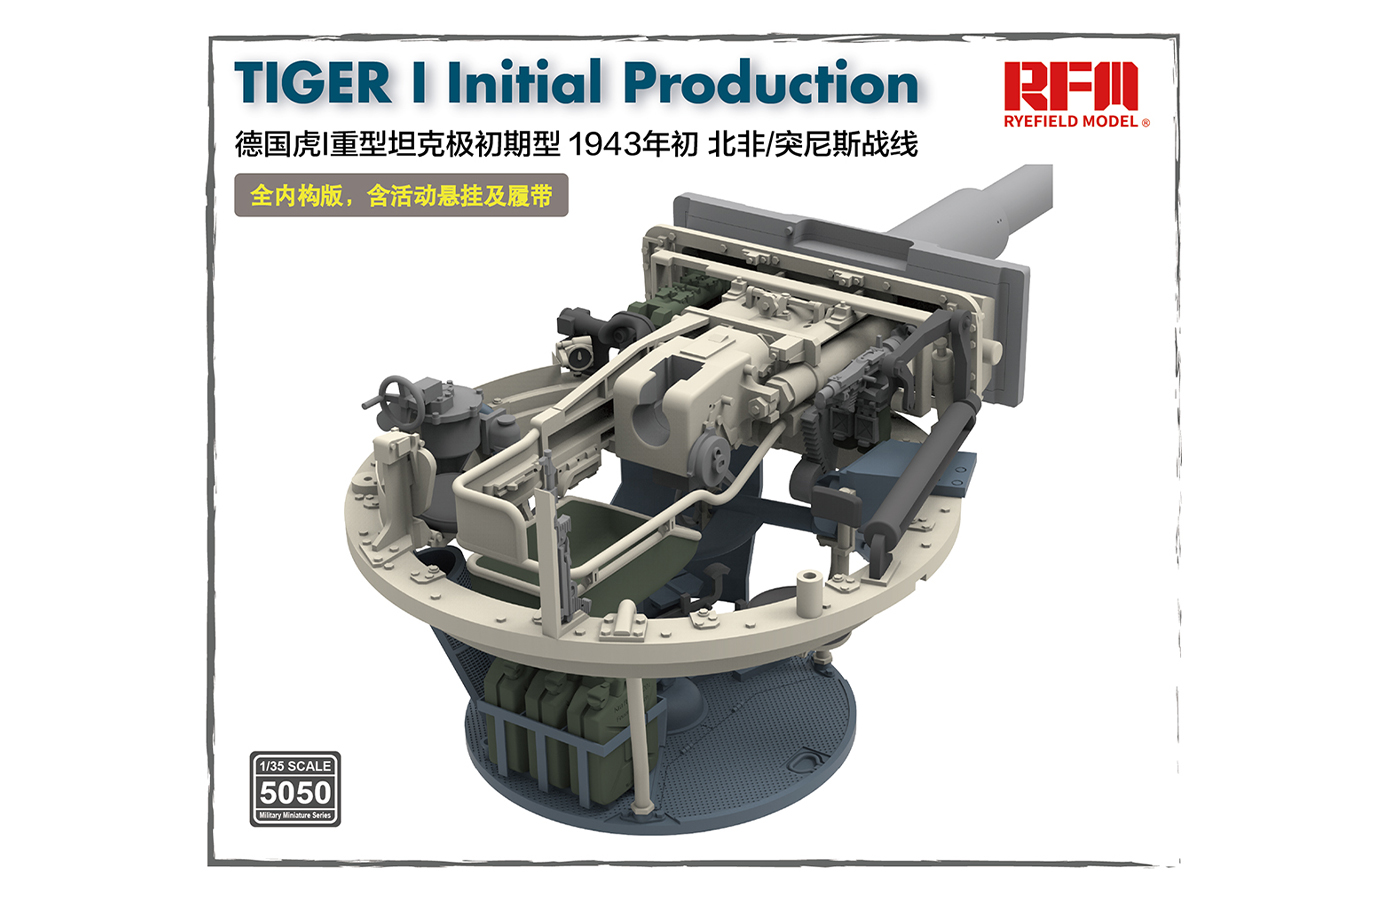 TIGER I Initial Production